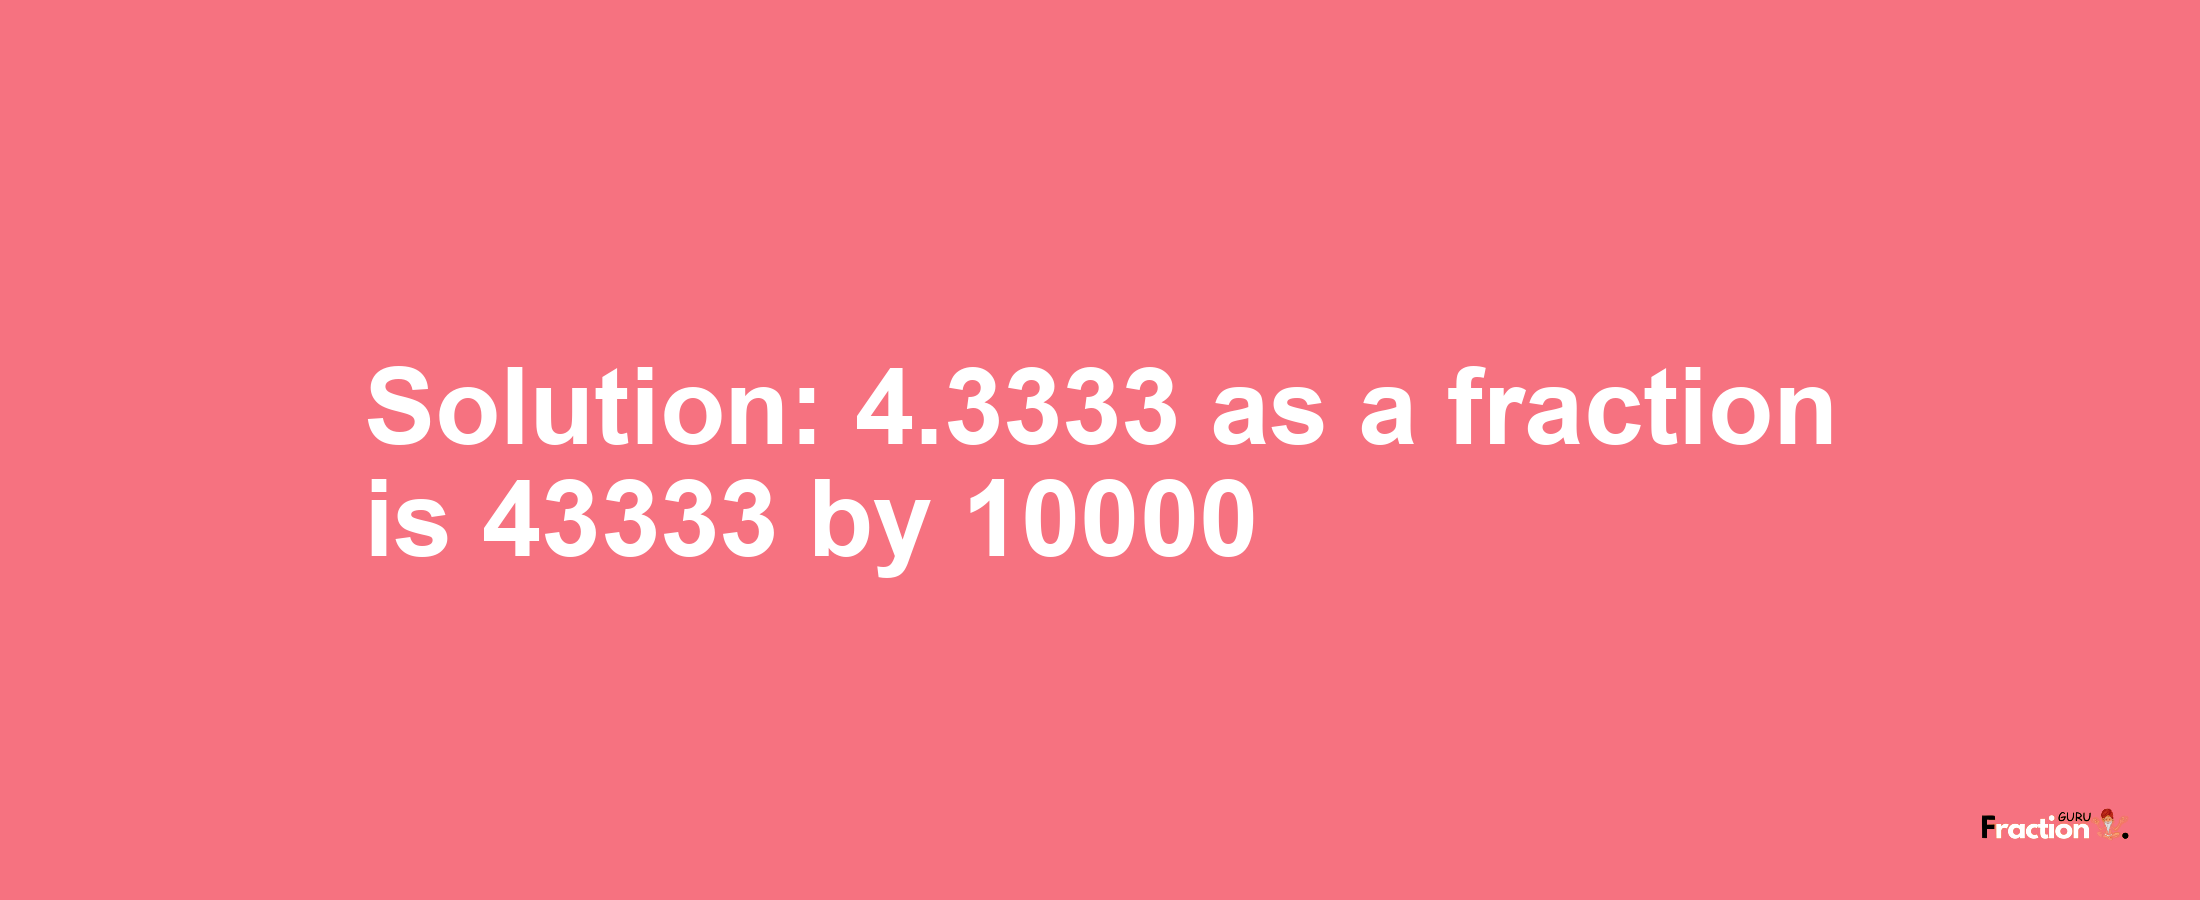 Solution:4.3333 as a fraction is 43333/10000